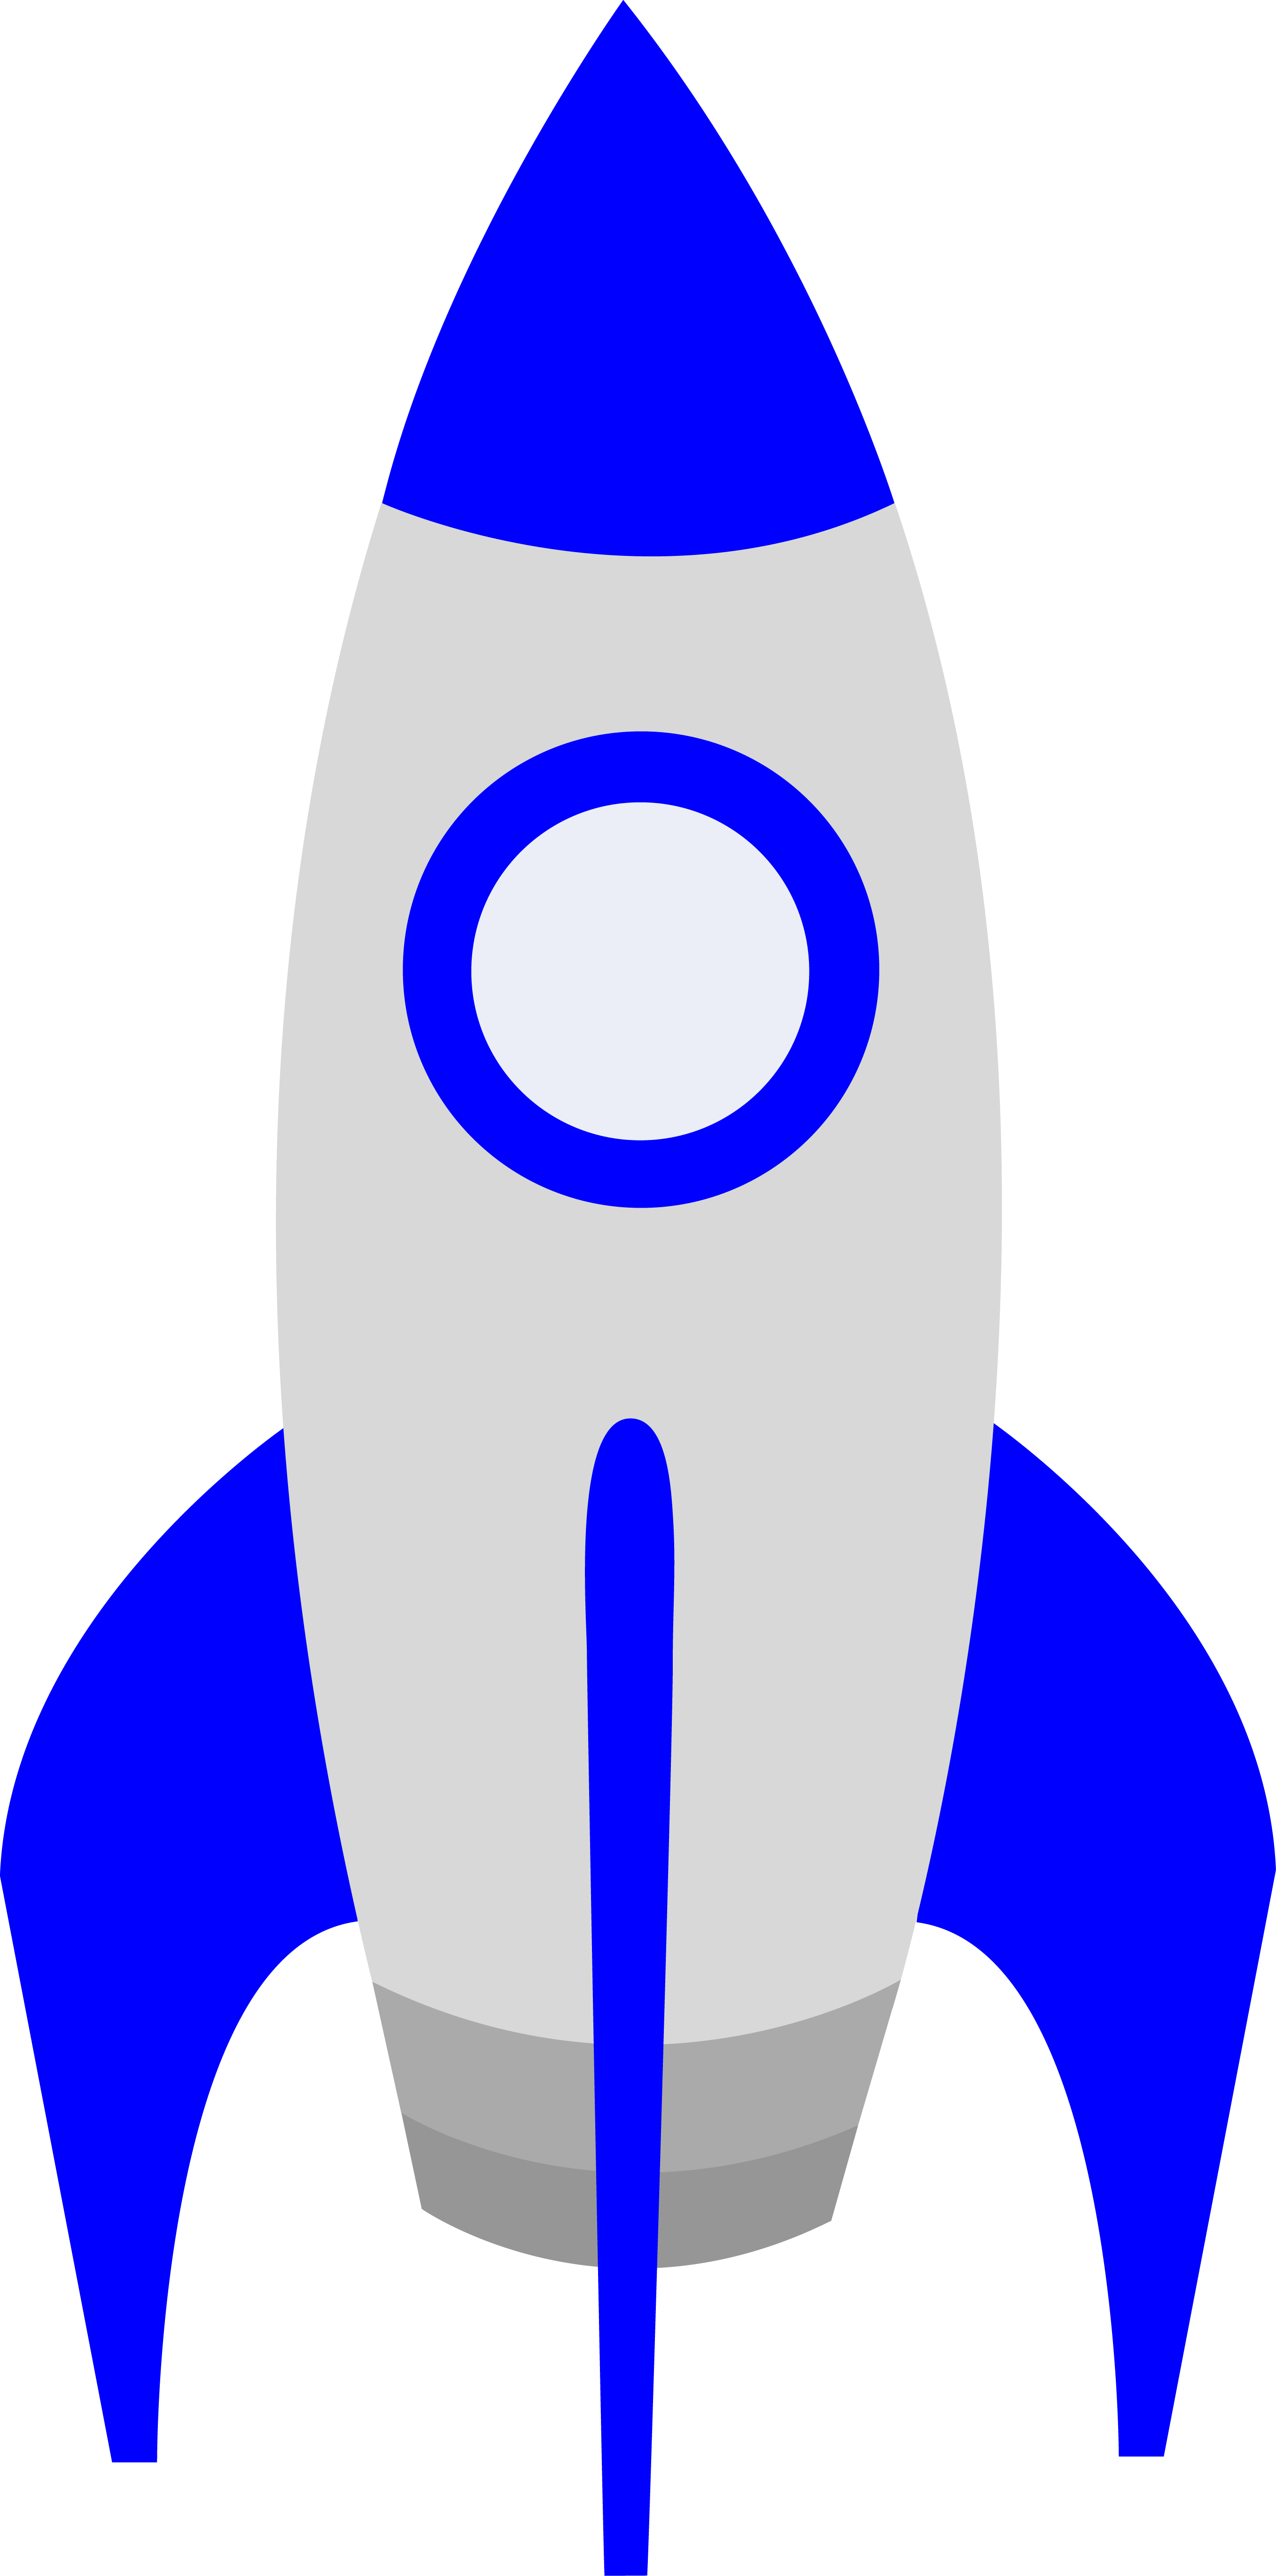 Moon clipart rocket. For outer space free